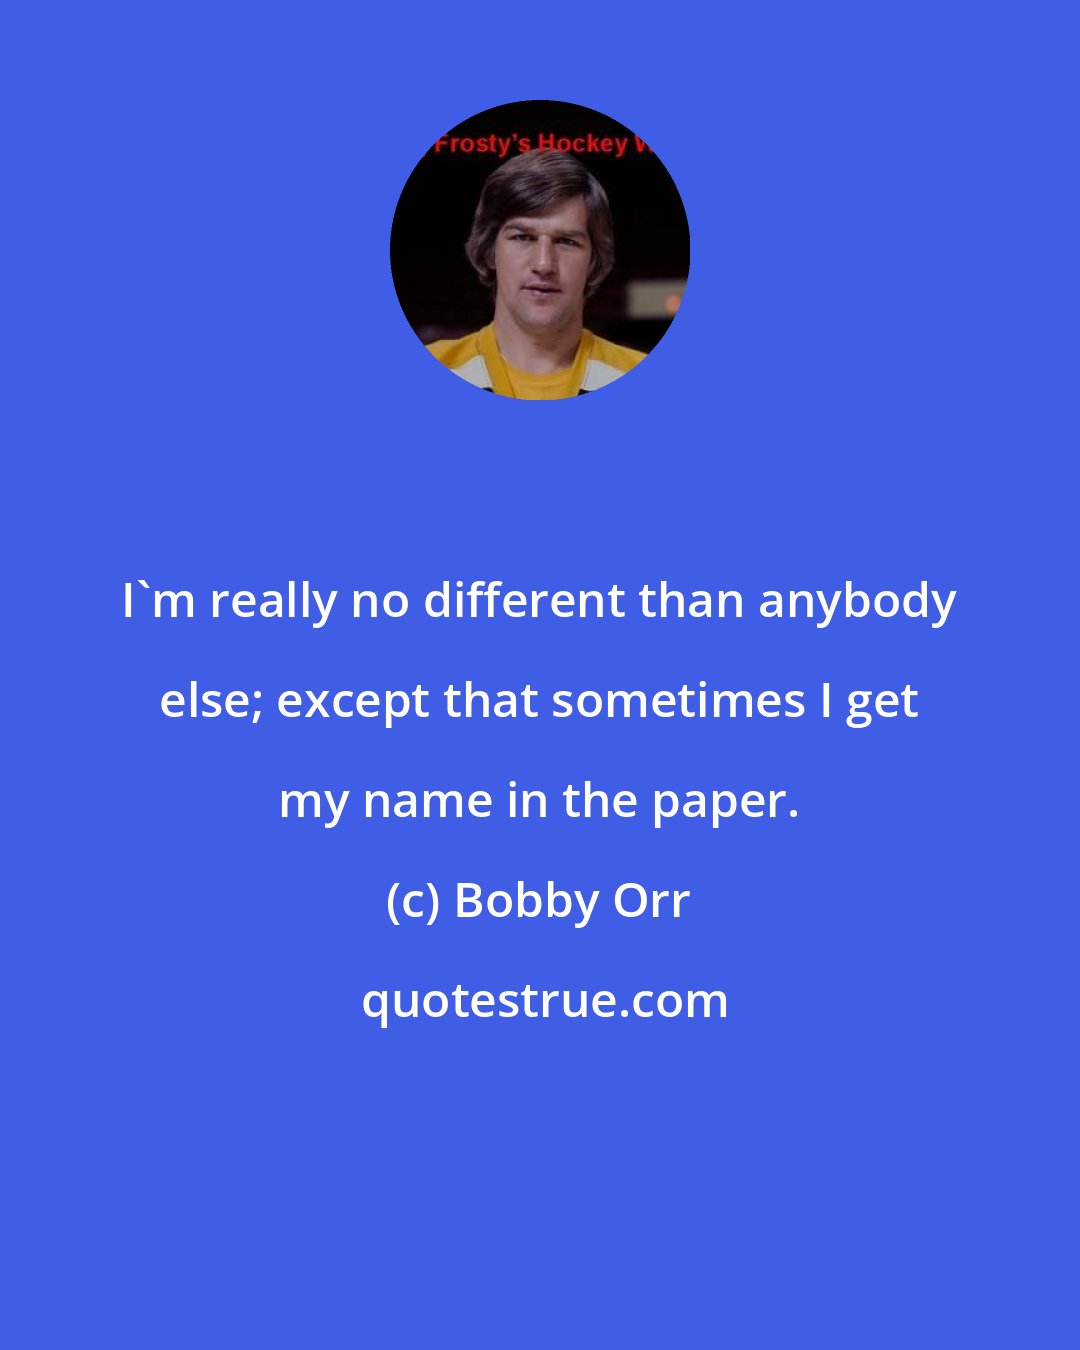 Bobby Orr: I'm really no different than anybody else; except that sometimes I get my name in the paper.